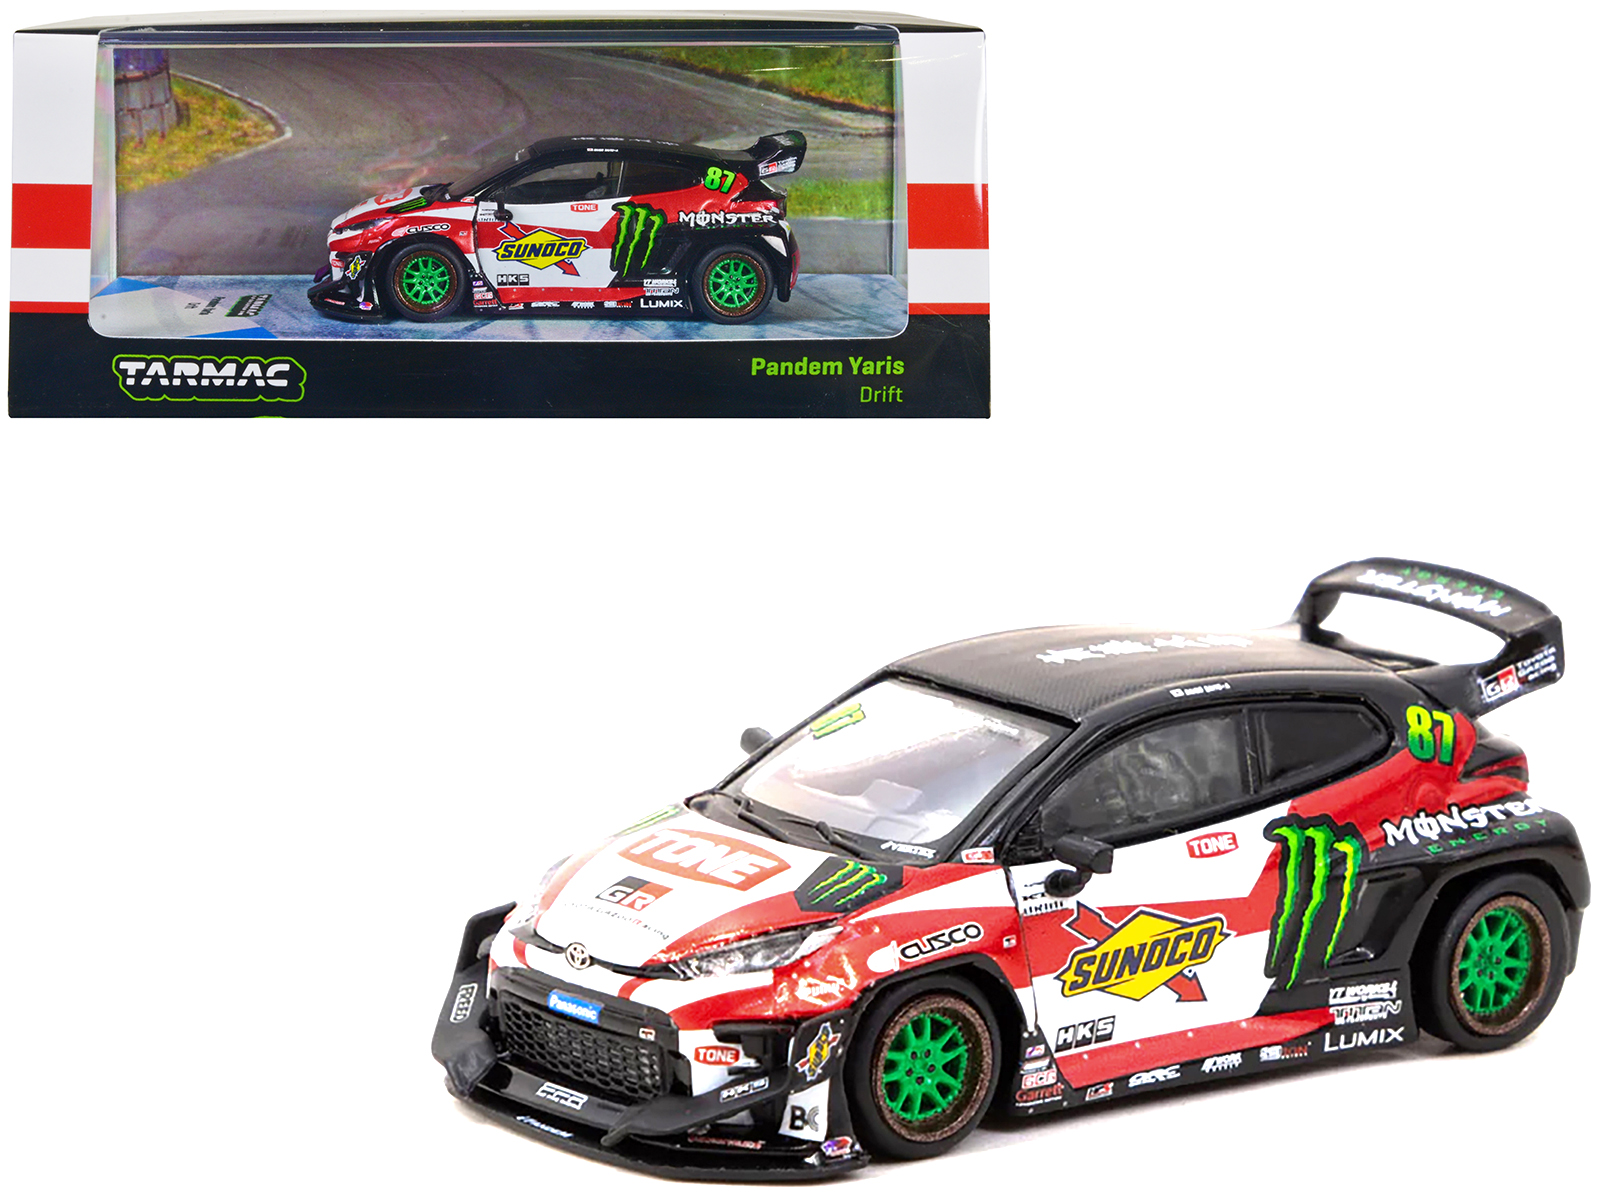 Tarmac Works Toyota Yaris #87 Red and White w/Black Top and Graphics "Monster Energy" "Hobby64" Series 1/64 Diecast Model Car by Tarmac Works